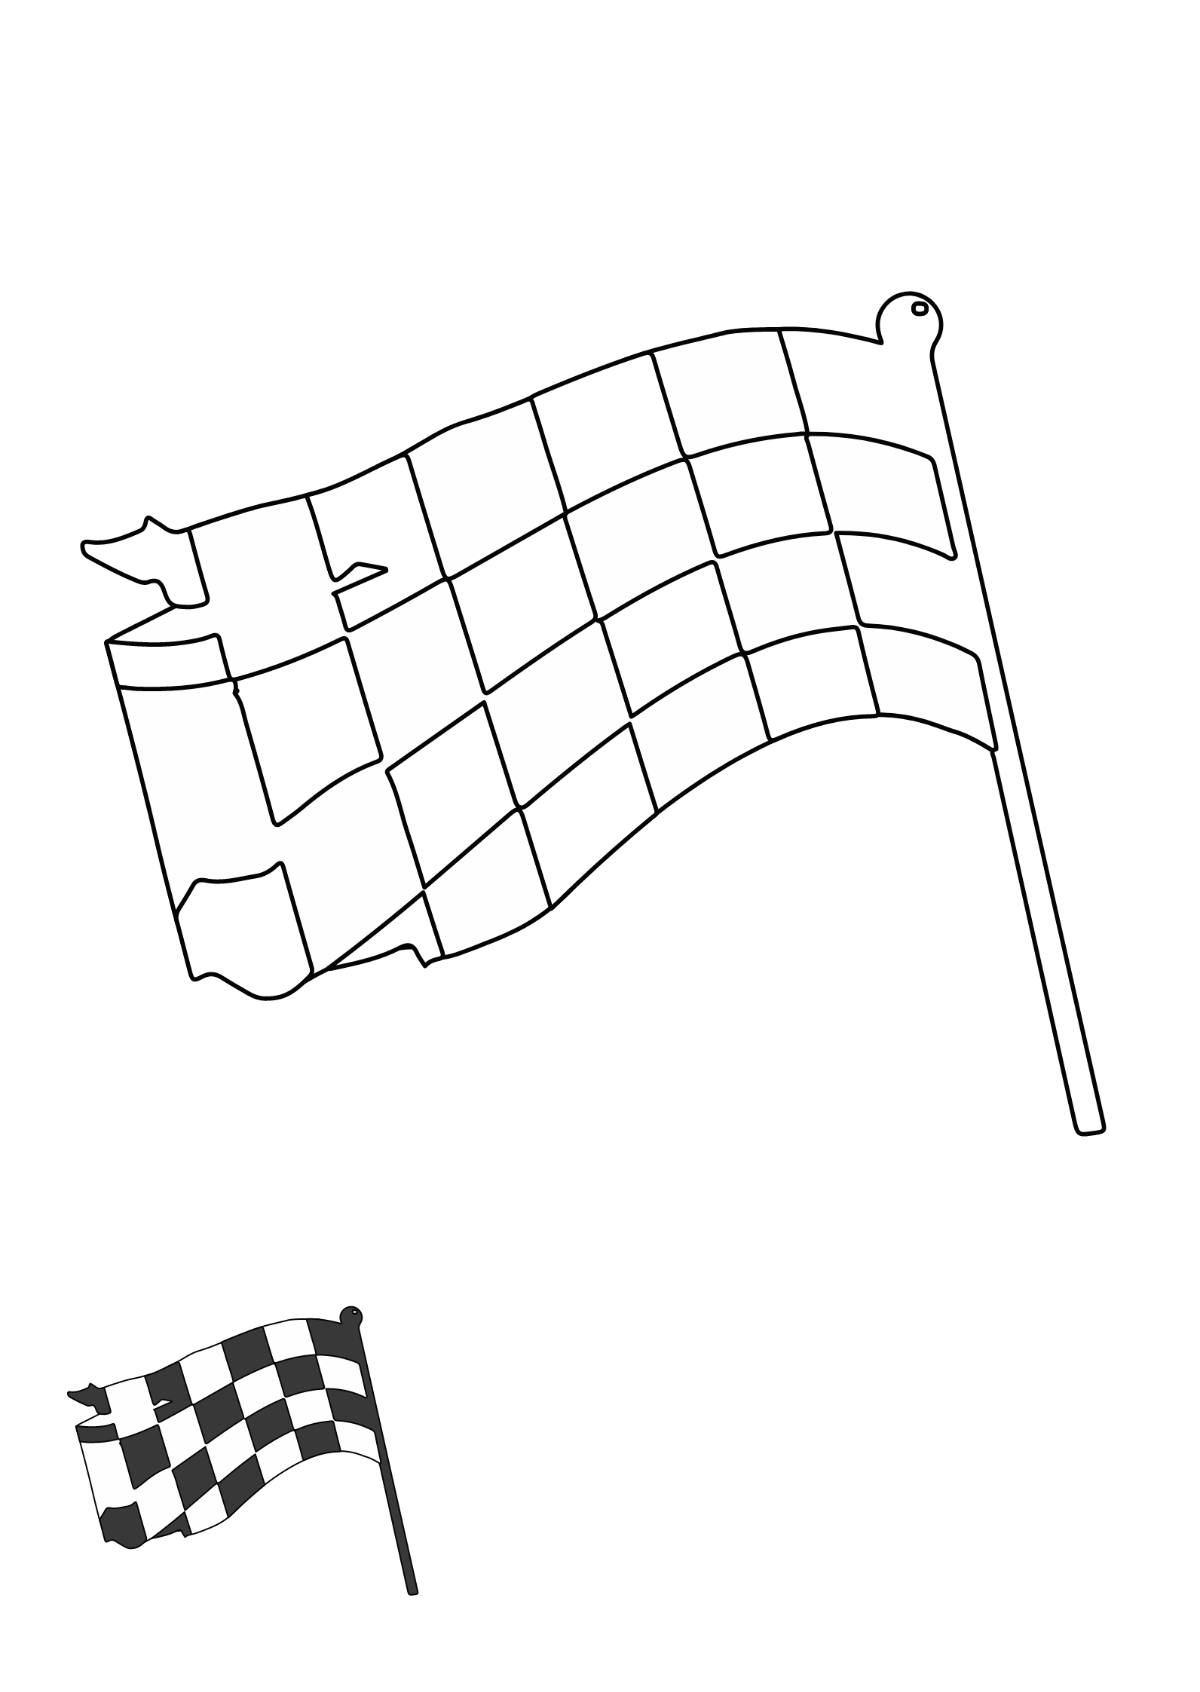 Ripped Checkered Flag coloring page